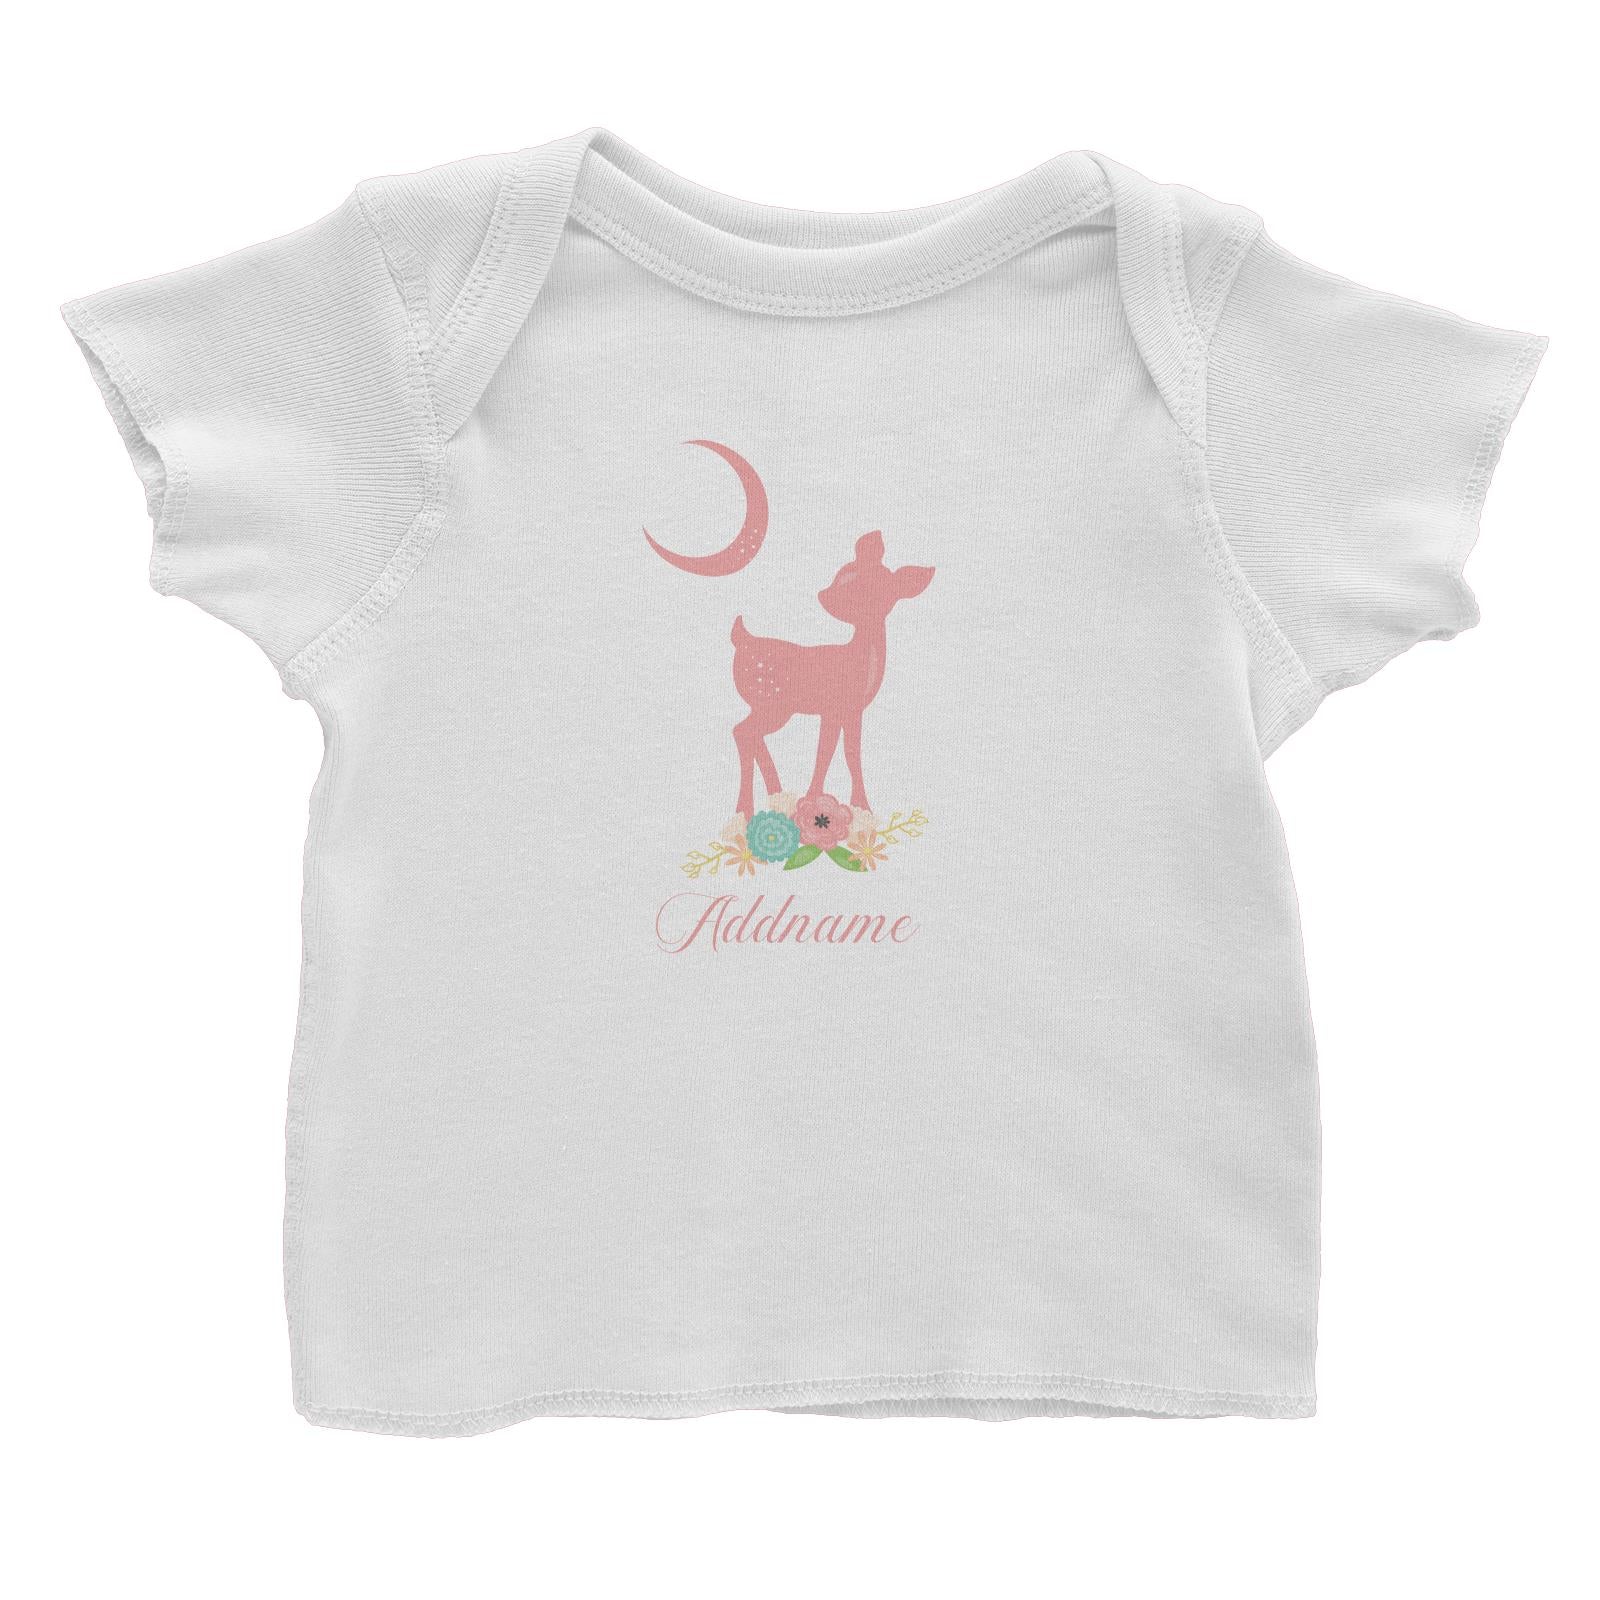 Basic Family Series Pastel Deer Pink Fawn With Flower Addname Baby T-Shirt